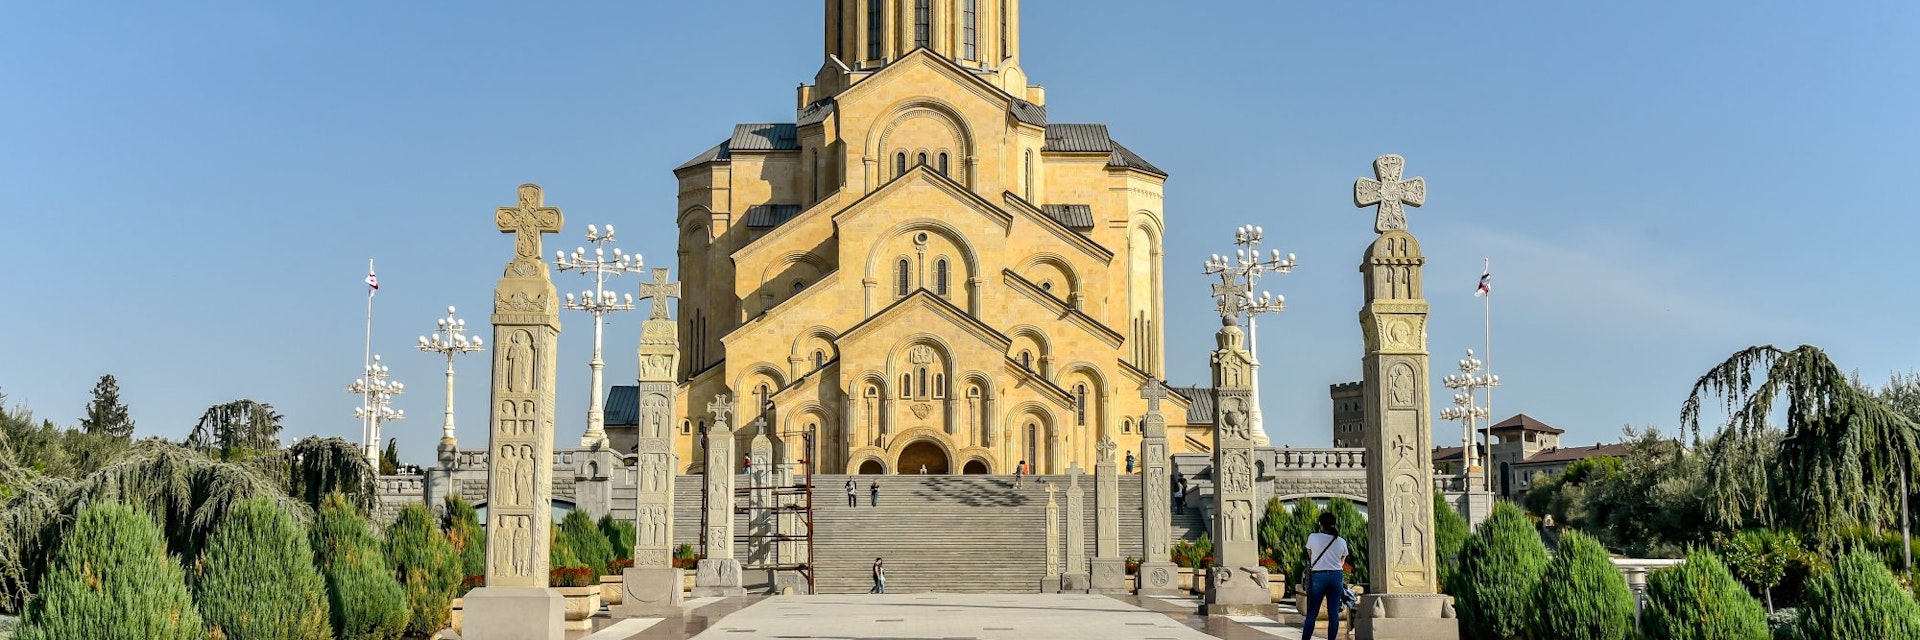 October 18, 2019: Exterior of the Holy Trinity Cathedral of Tbilisi (Sameba) in Old Tbilisi.